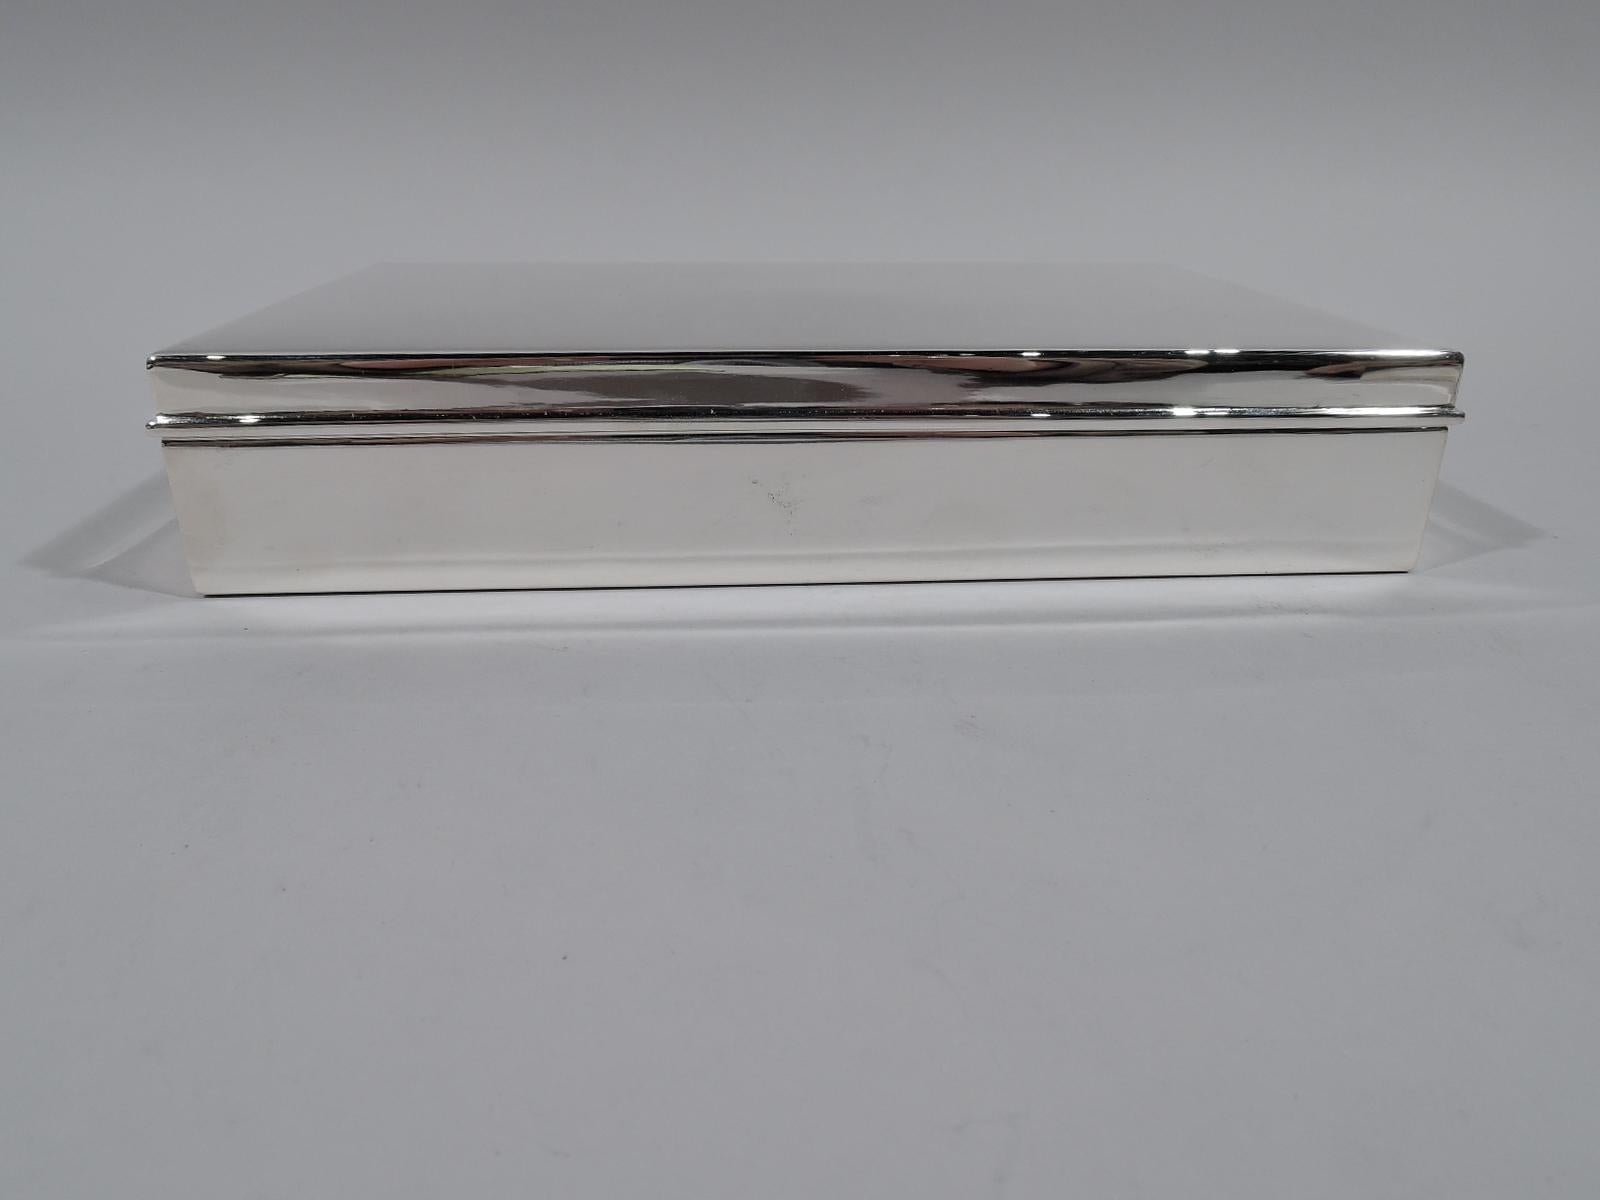 Large and heavy sterling silver desk box. Made by Tiffany & Co. in New York. Rectangular with straight sides. Cover flat and hinged with molded rim. Box and cover interior cedar-lined and partitioned. Fully marked including pattern no. 22358,